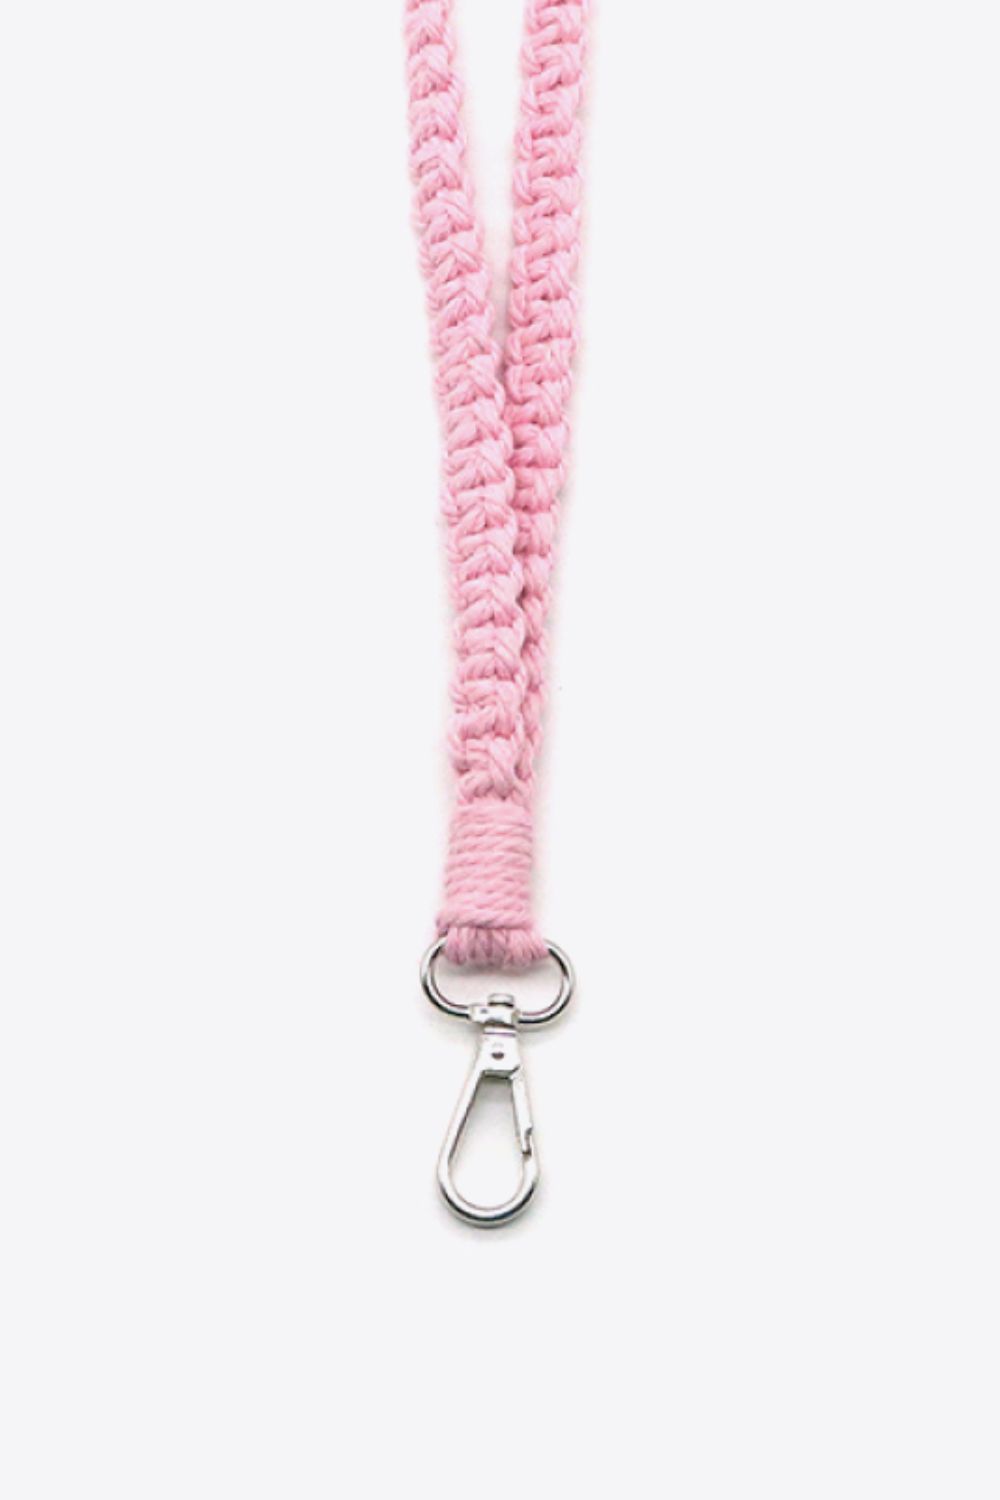 Trendsi Cupid Beauty Supplies Keychains Assorted 2-Pack Hand-Woven Lanyard Keychain